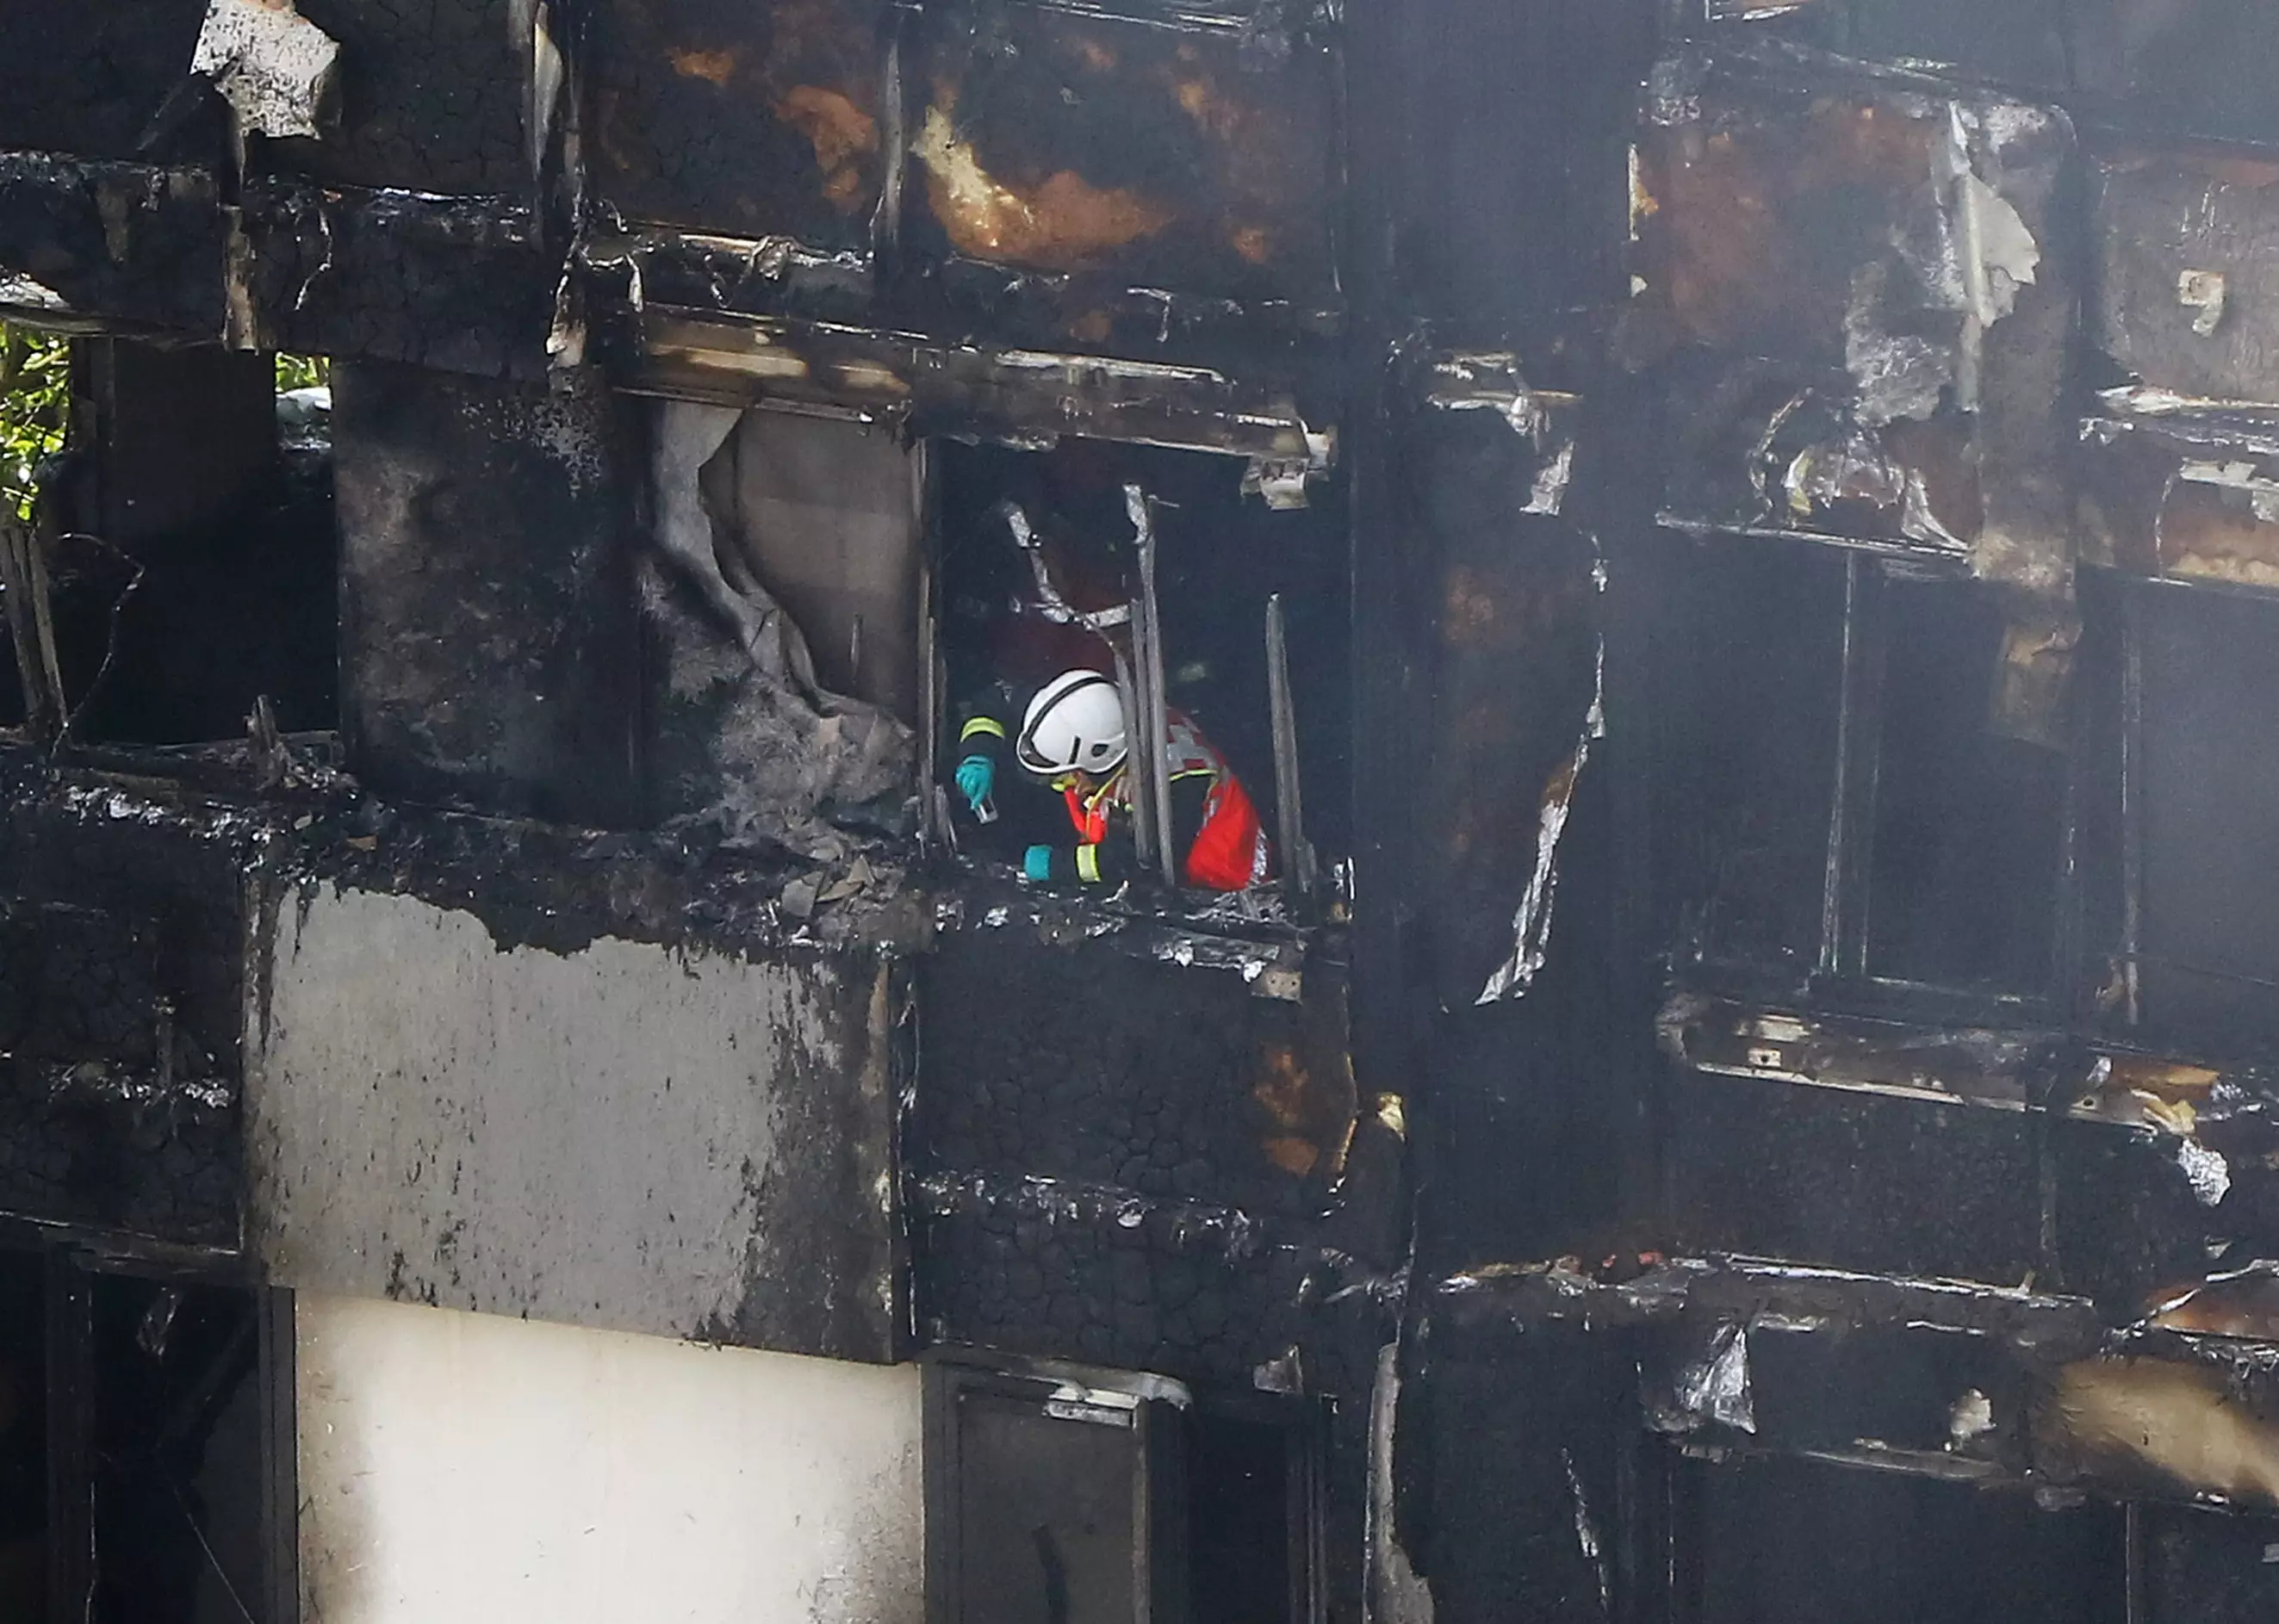 Charred remains of Grenfell Tower